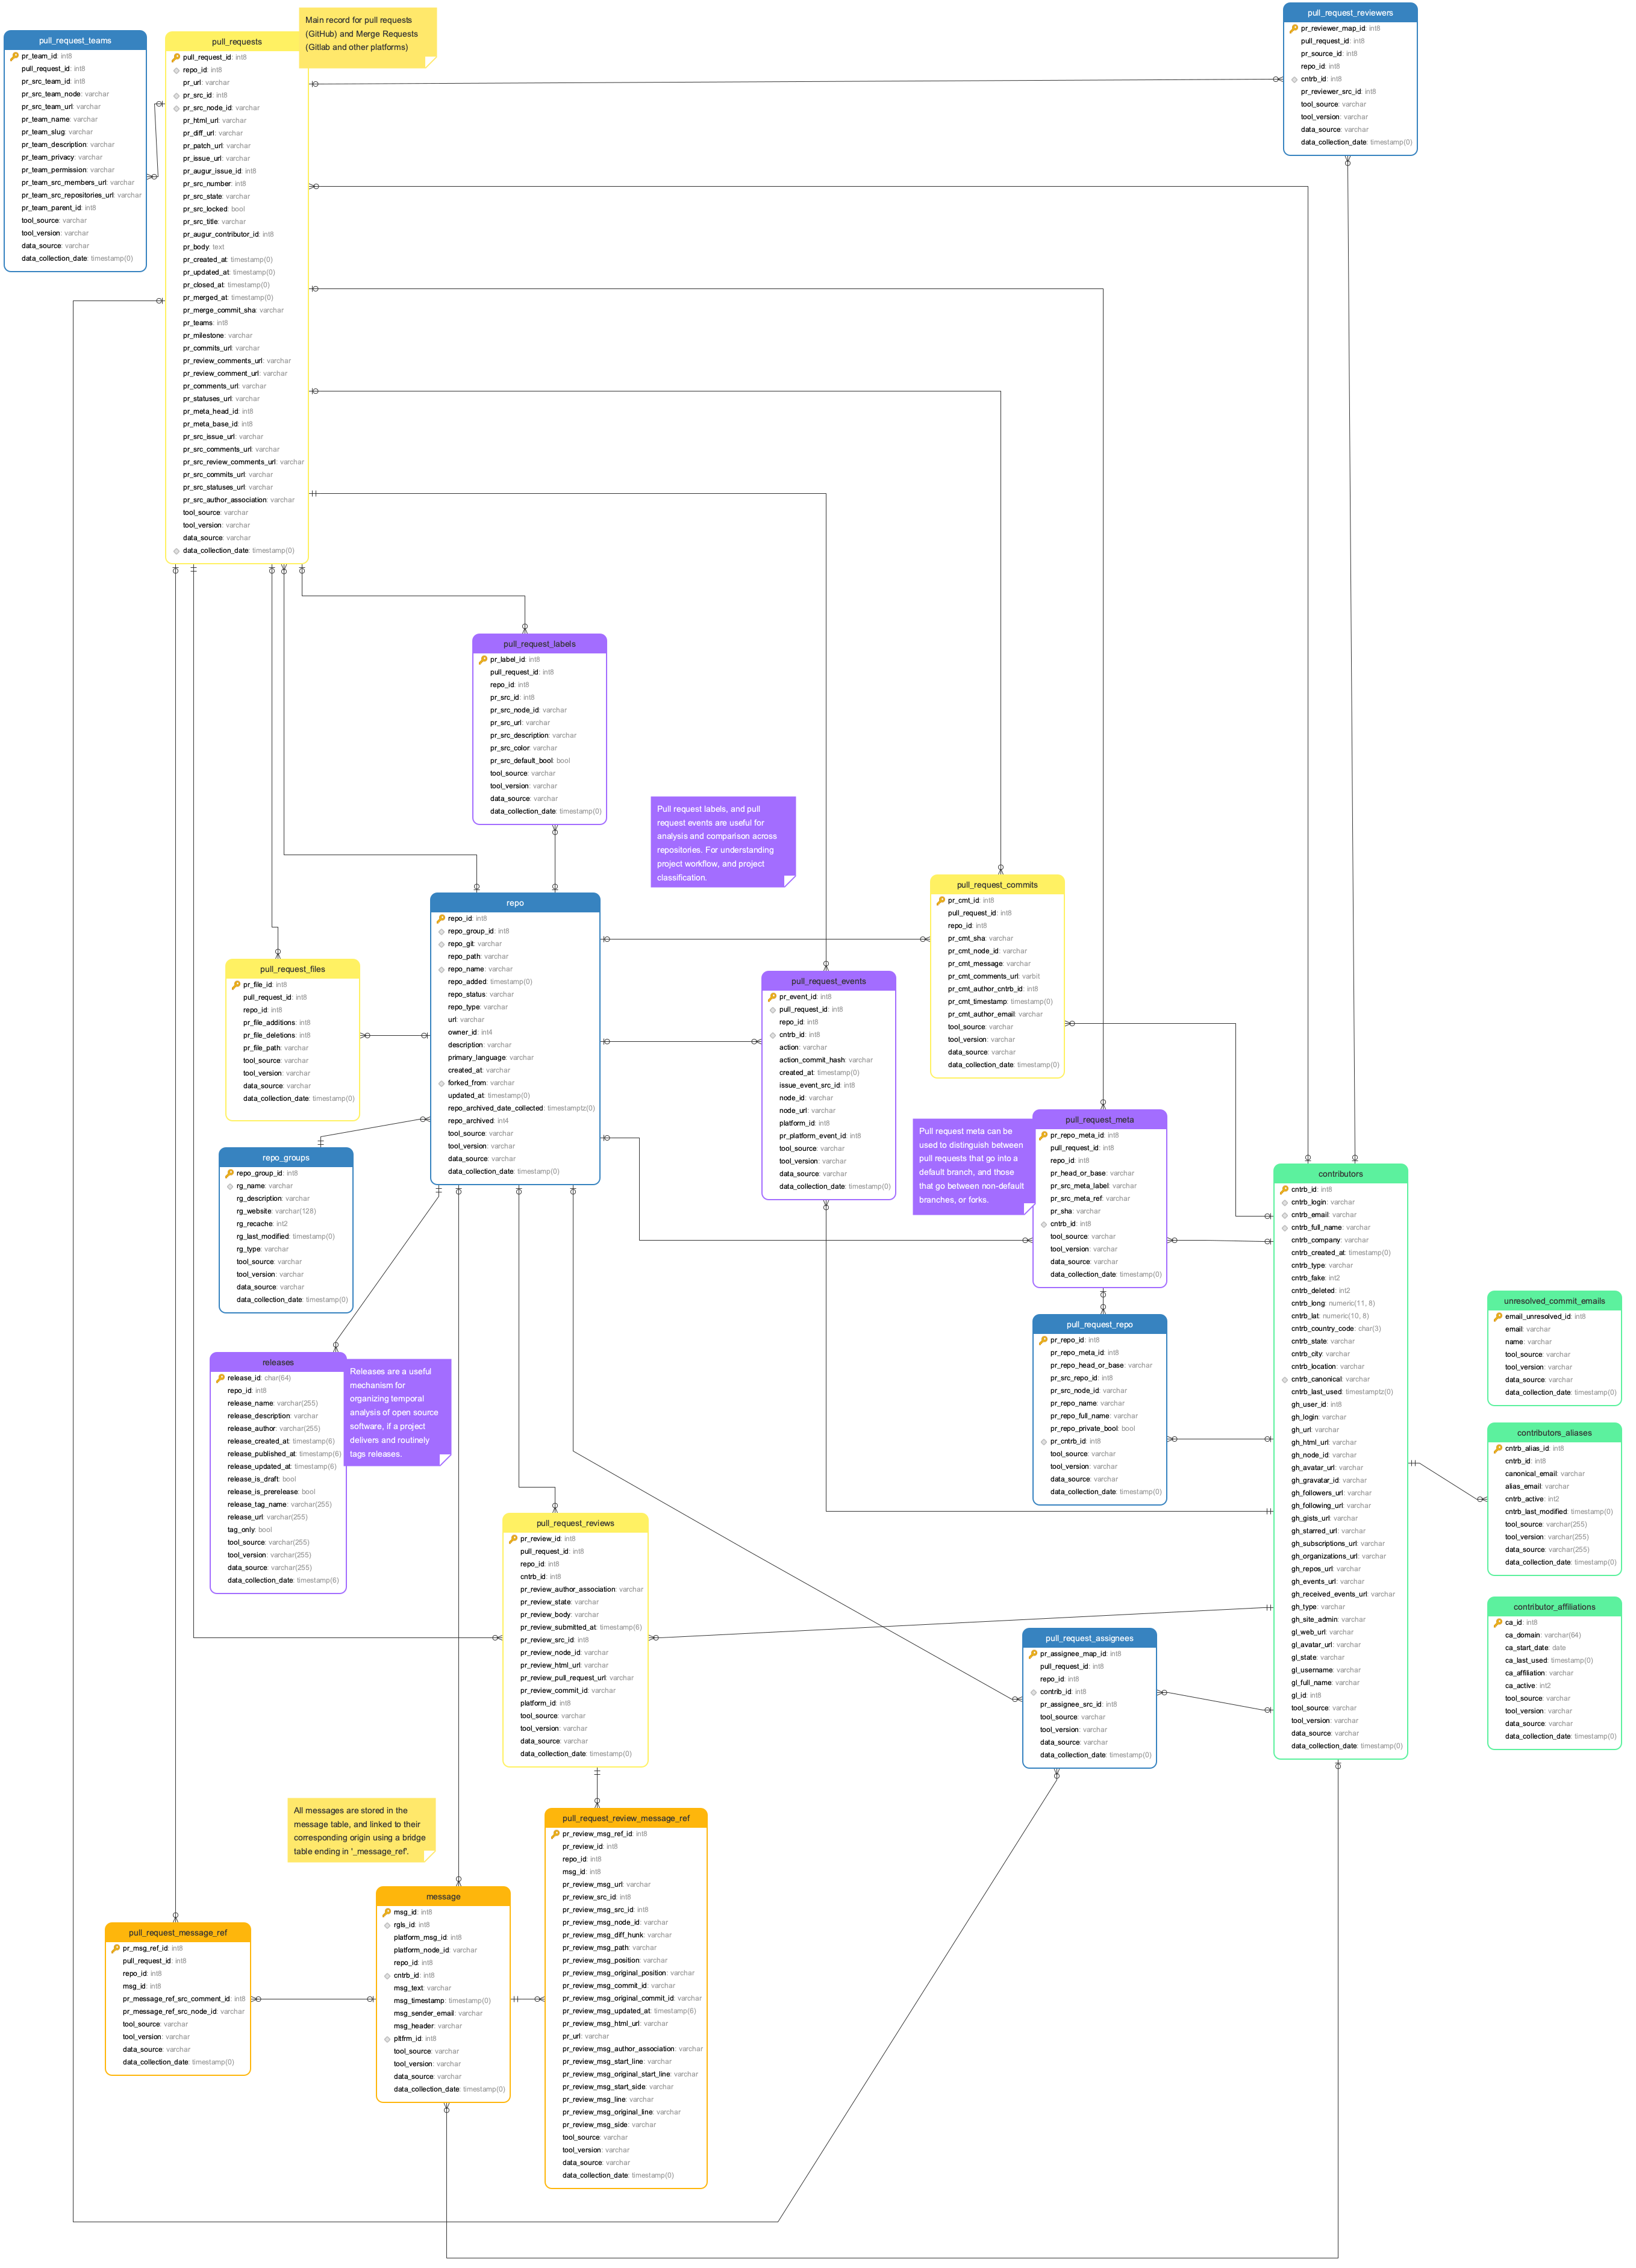 ../_images/20211011-pull-requests-augur-schema-v0.21.1.png